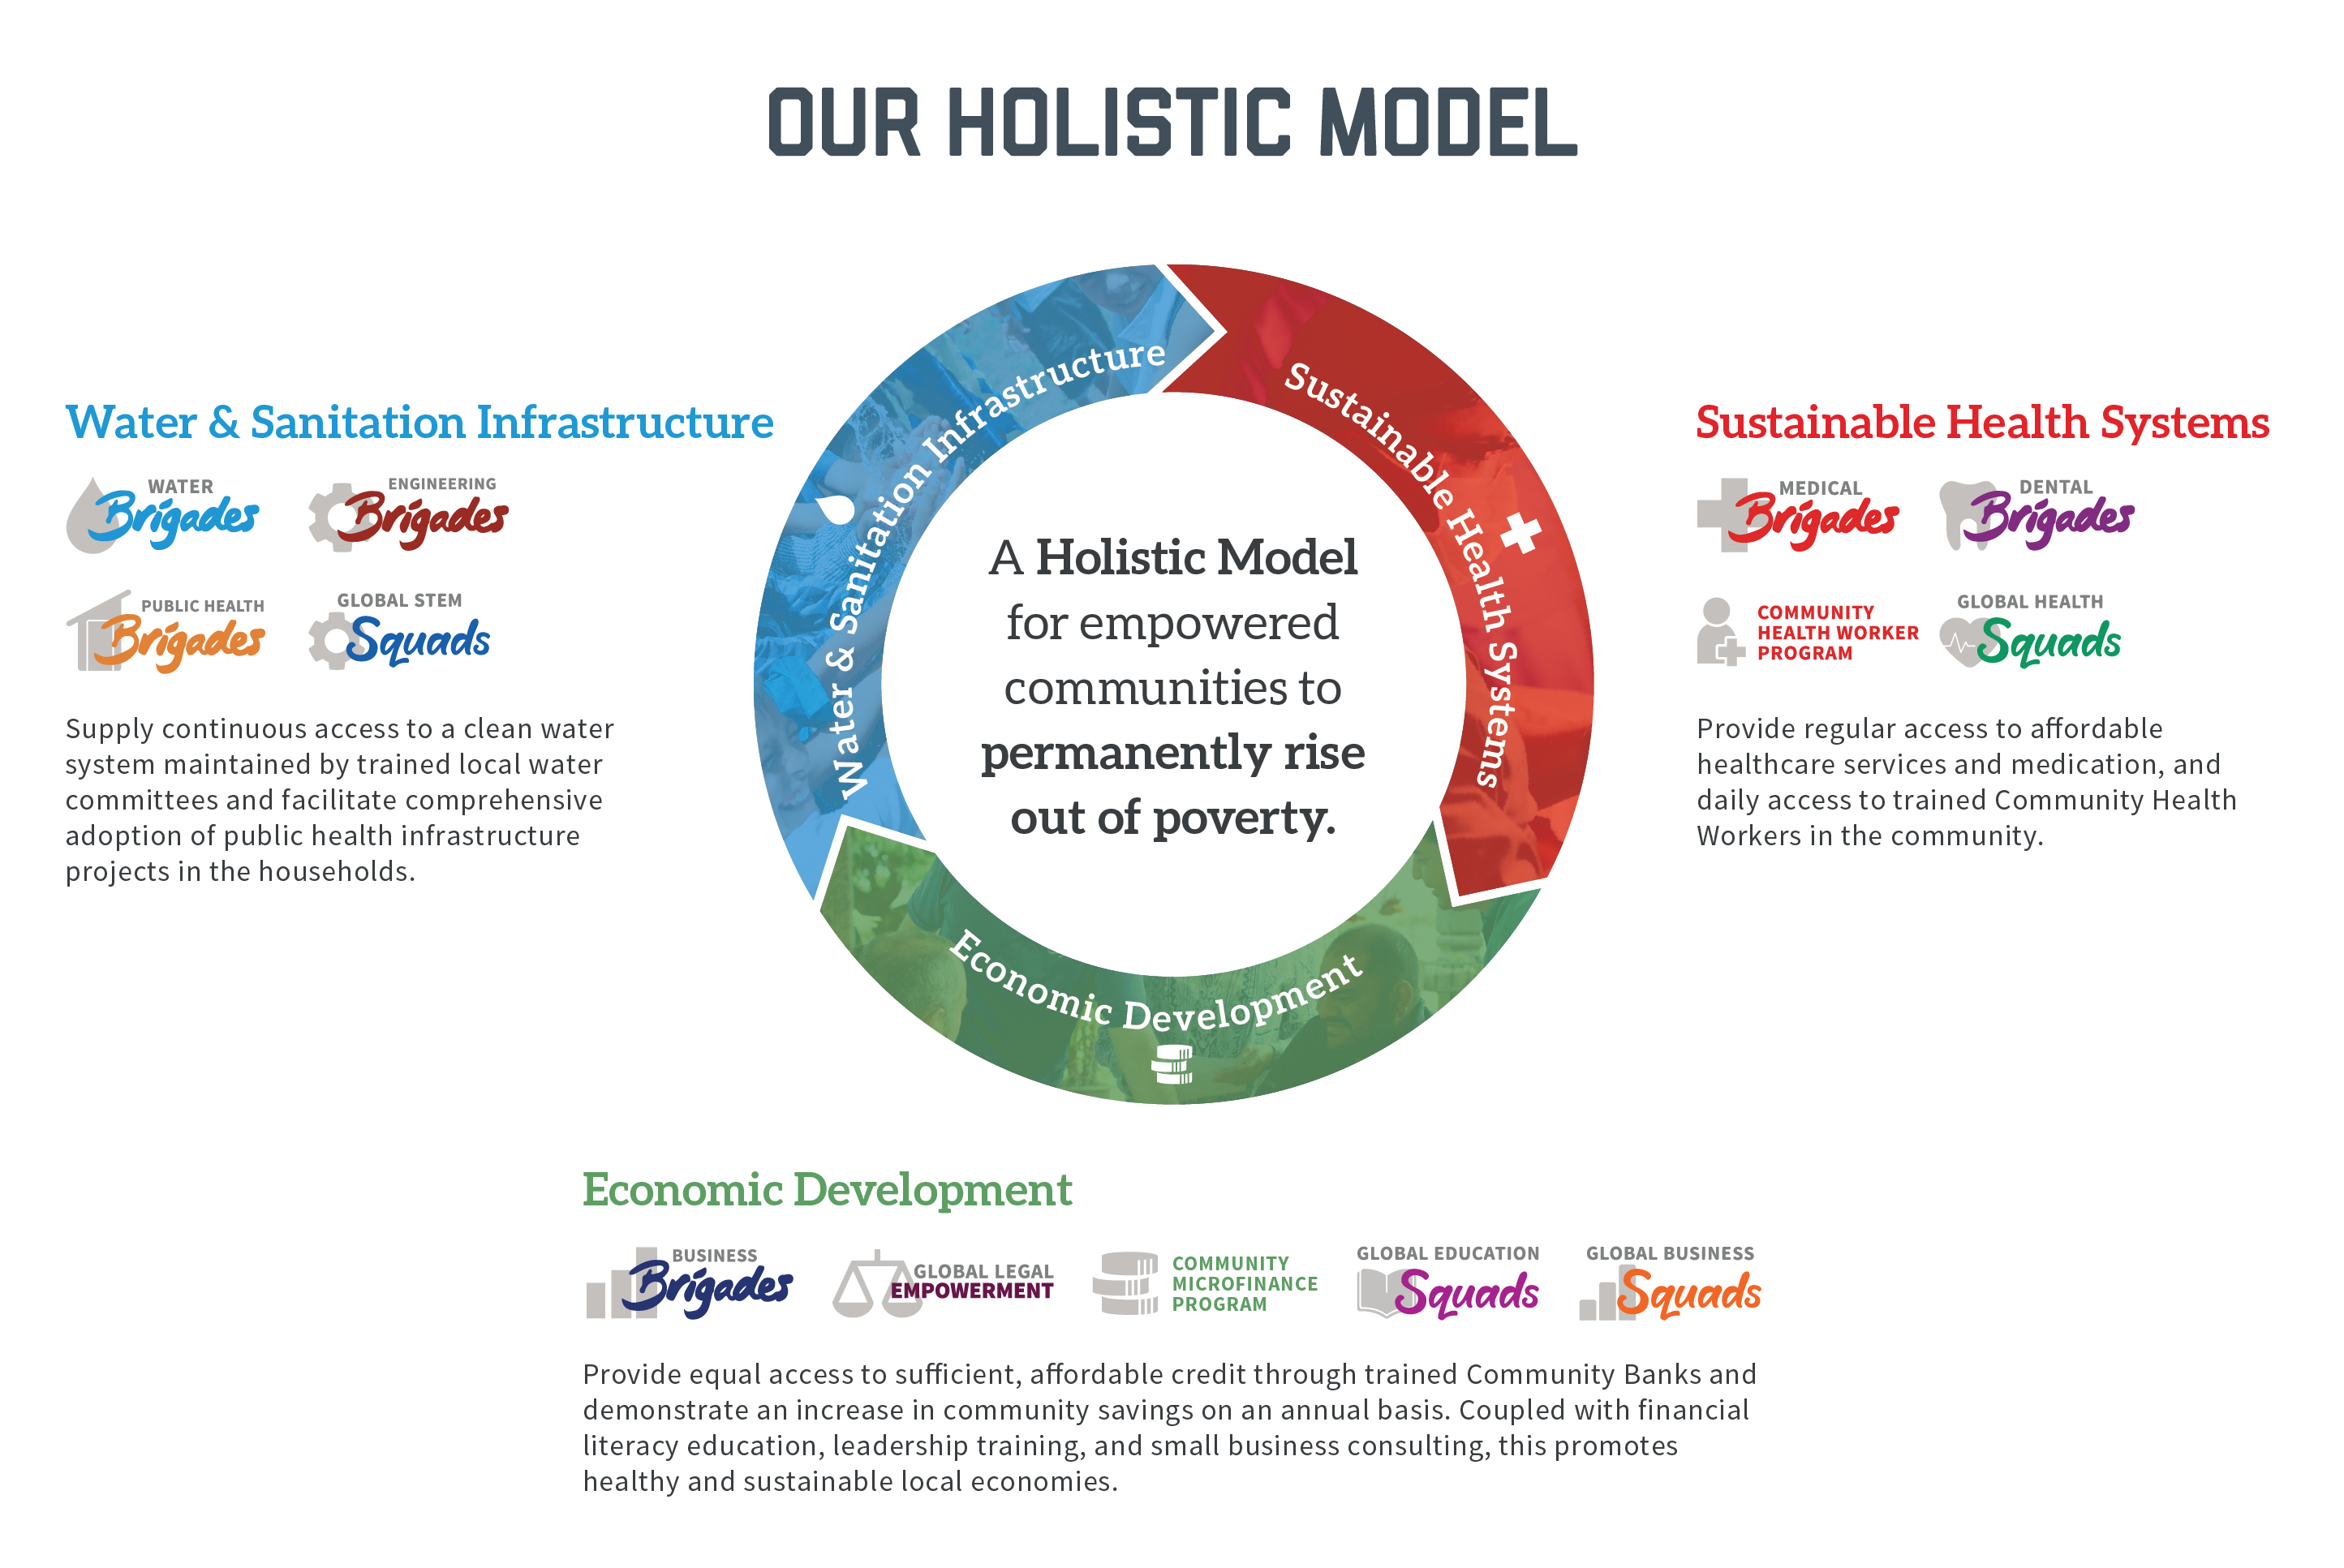 5 Common Questions About The Holistic Model